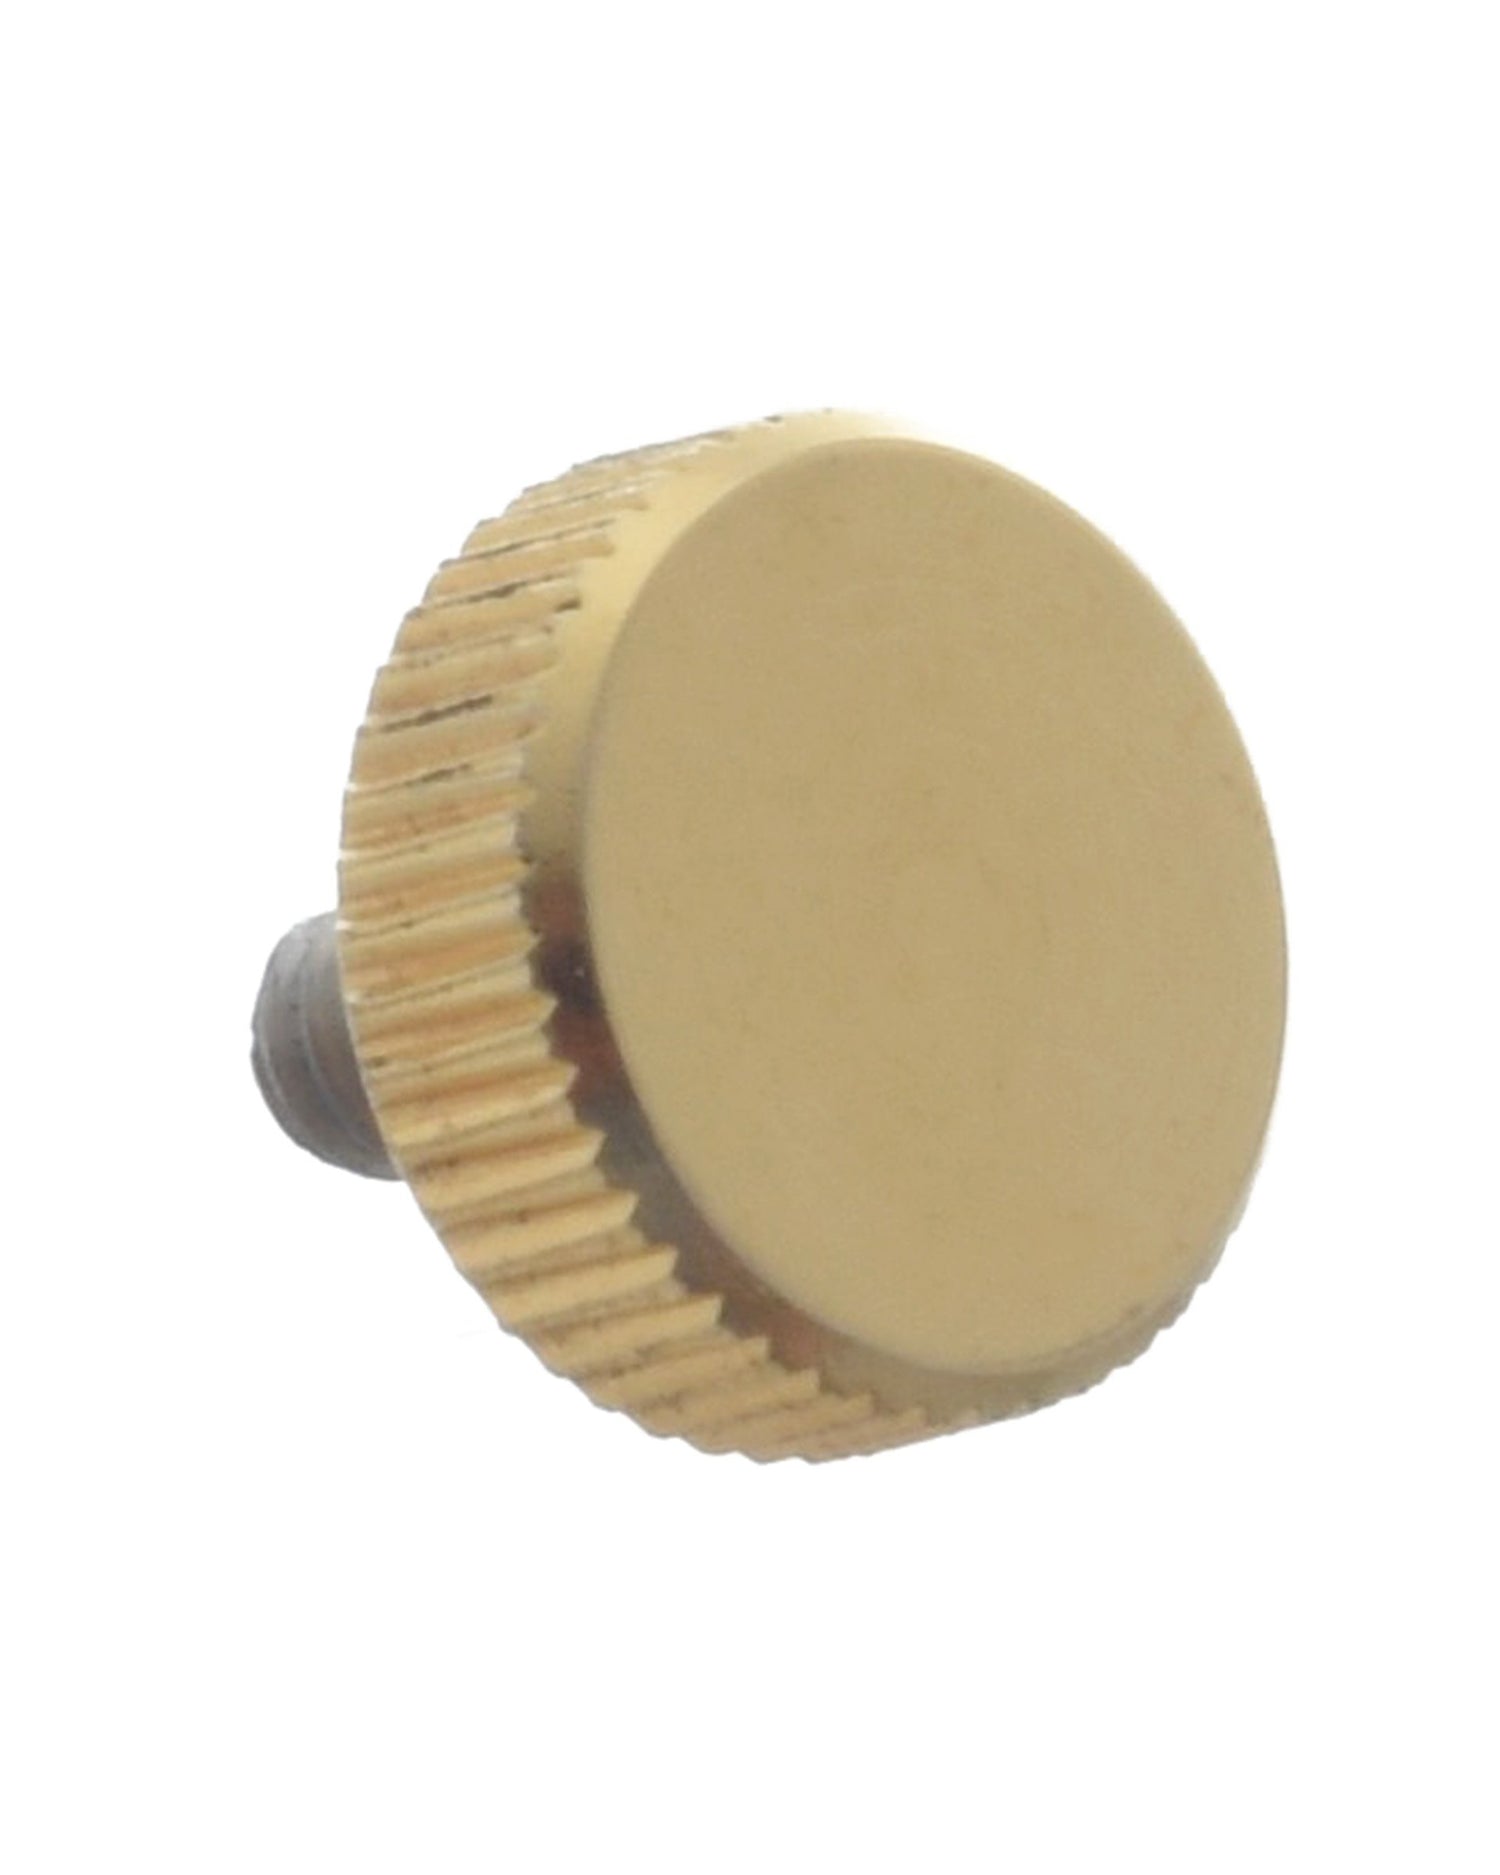 Image 1 of Bill Keith Replacement Side Thumbscrew (Set Screw), Gold - SKU# BP19 : Product Type Accessories & Parts : Elderly Instruments